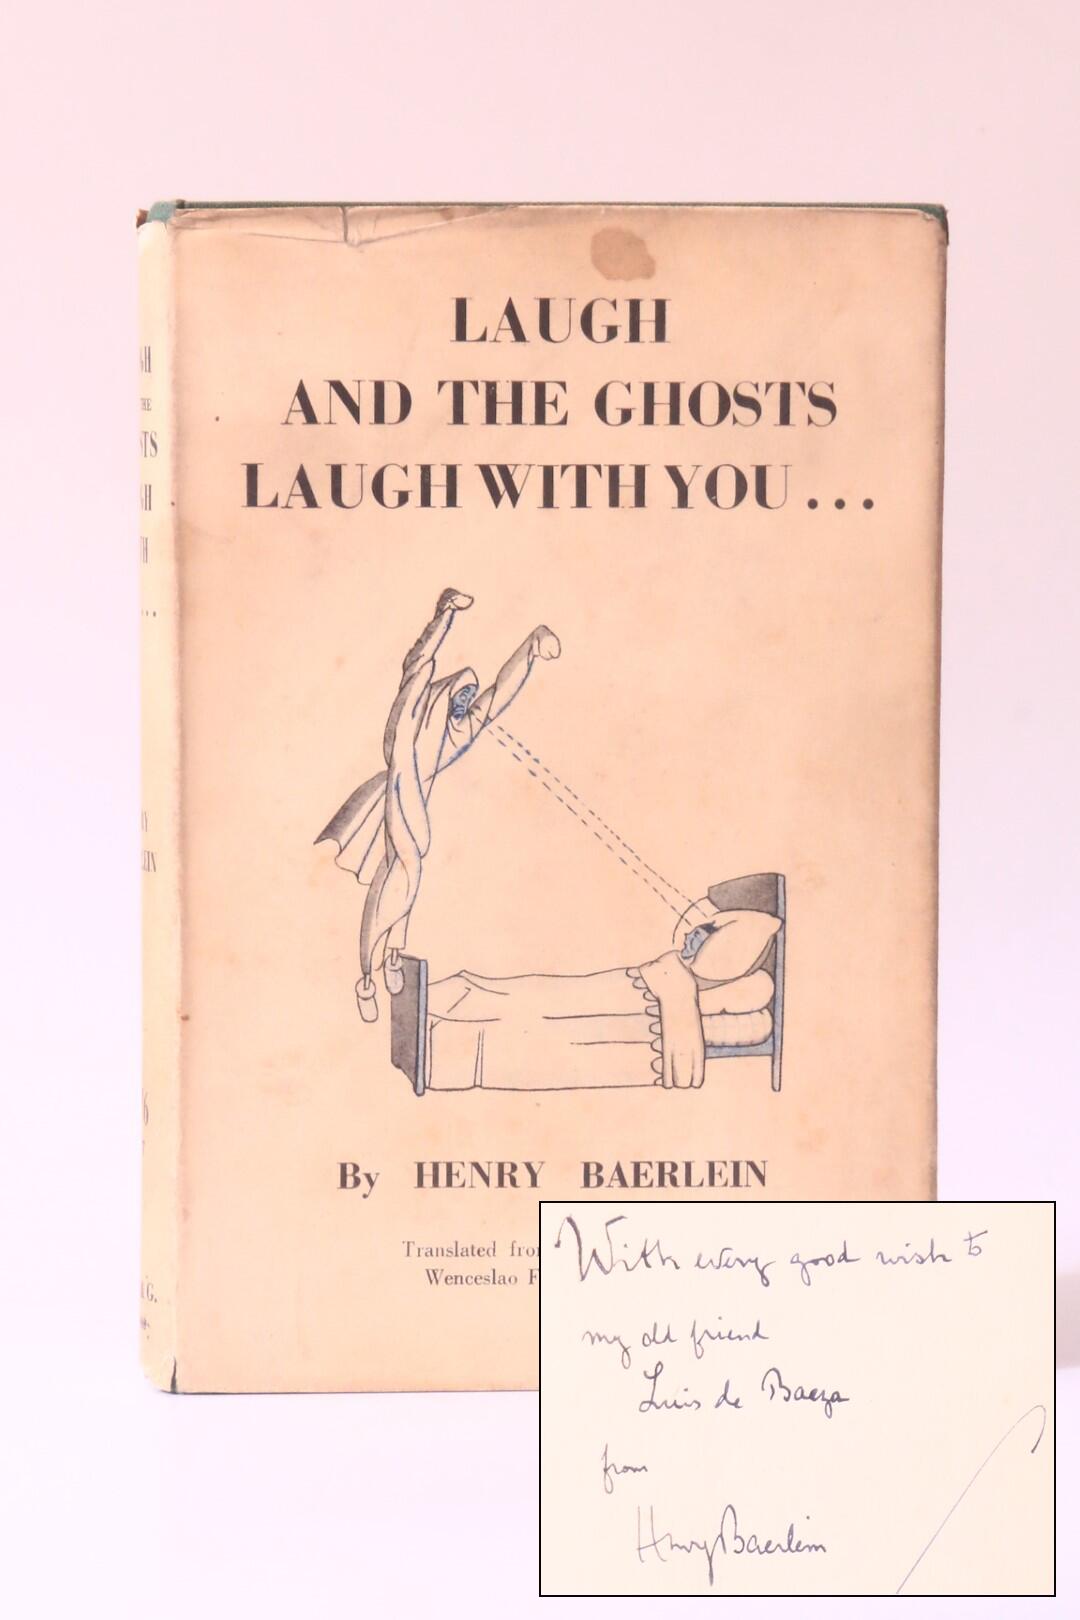 Henry Baerlein - Laugh and the Ghosts Laugh with you? - British Technical & General Press, 1951, Signed First Edition.